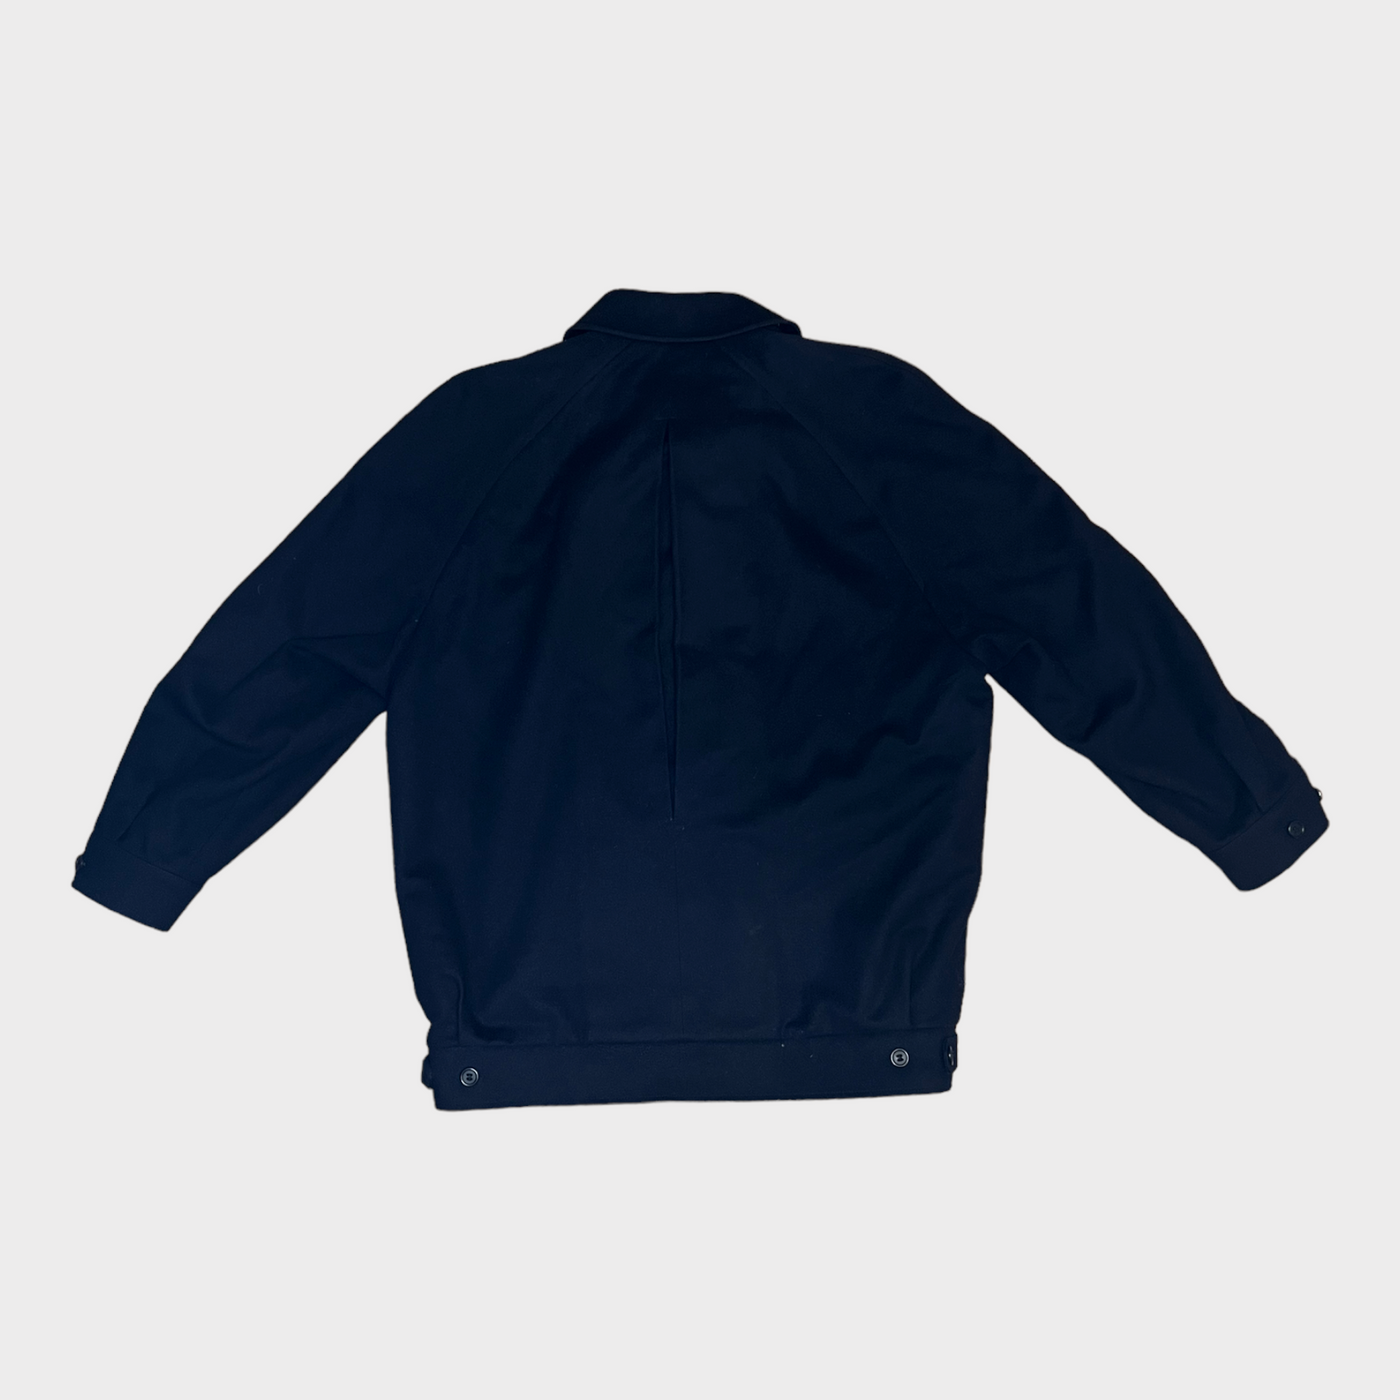 Back of the BURBERRY Short Wool Jacket in navy blue.